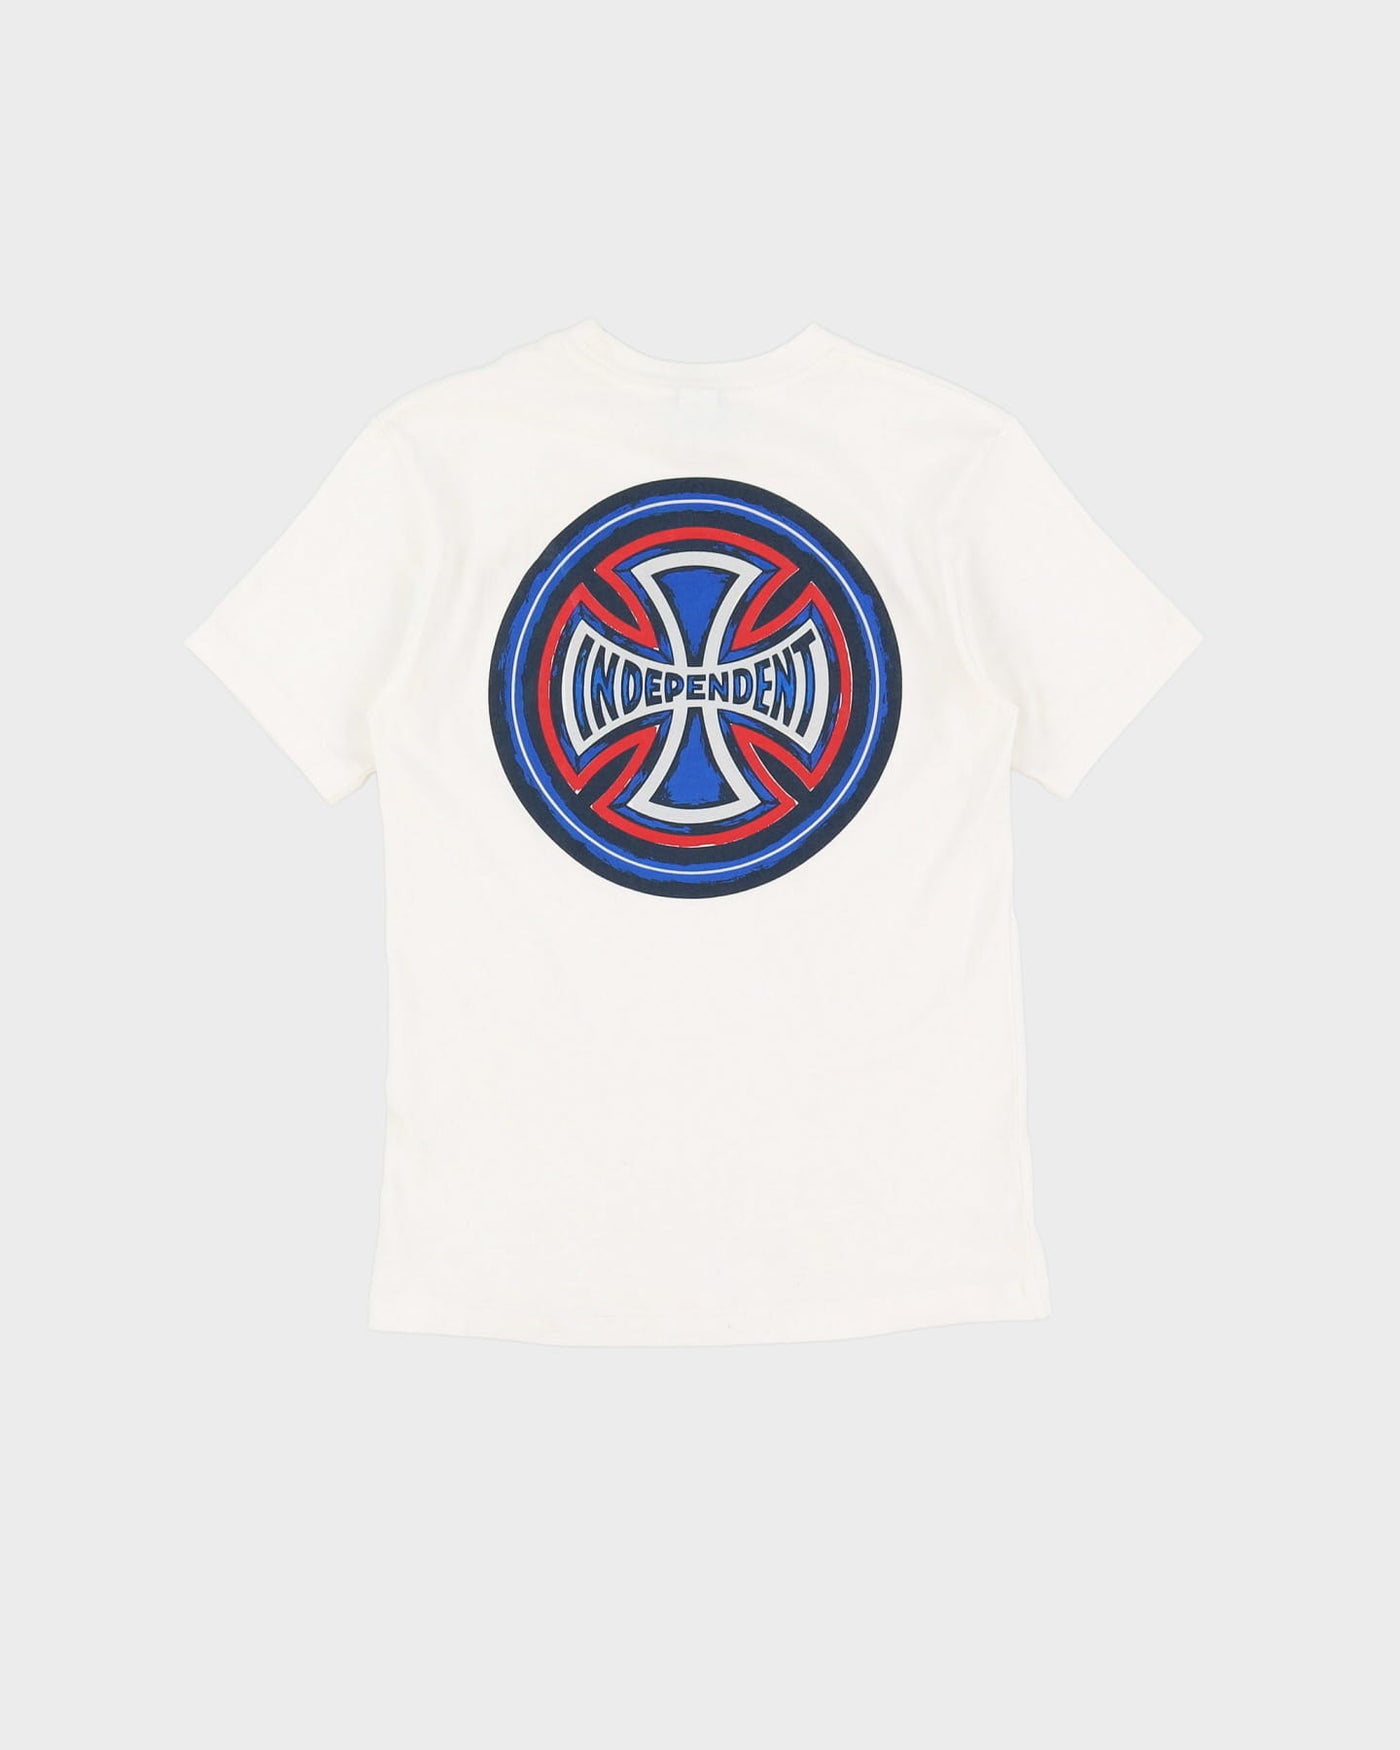 Independent Skate Brand White Graphic T-Shirt - S